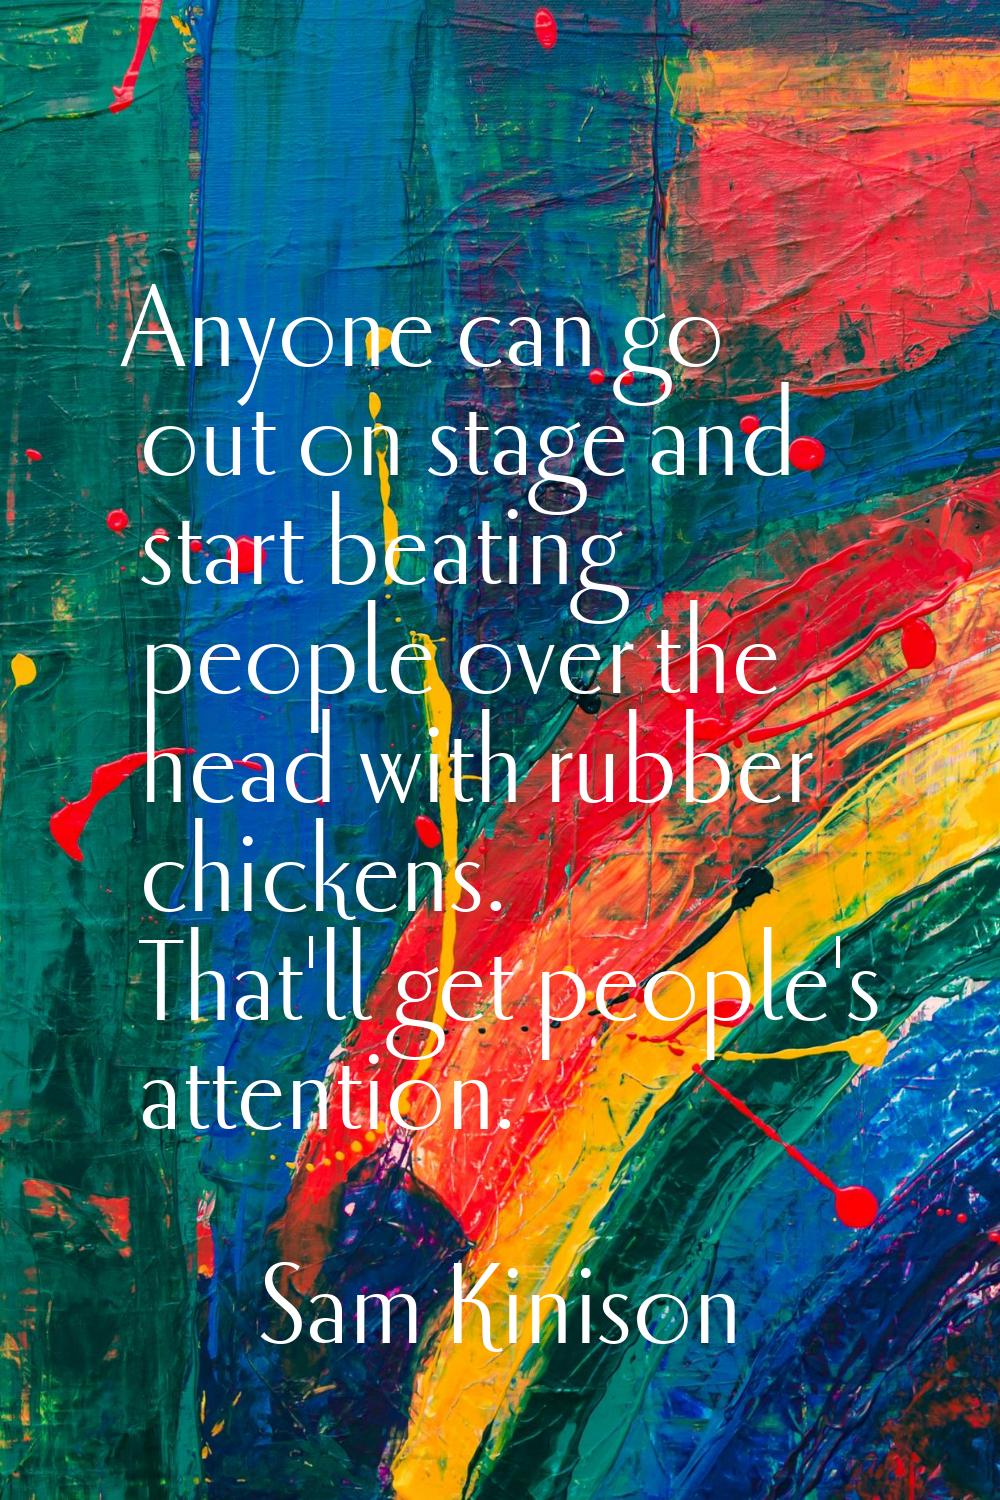 Anyone can go out on stage and start beating people over the head with rubber chickens. That'll get